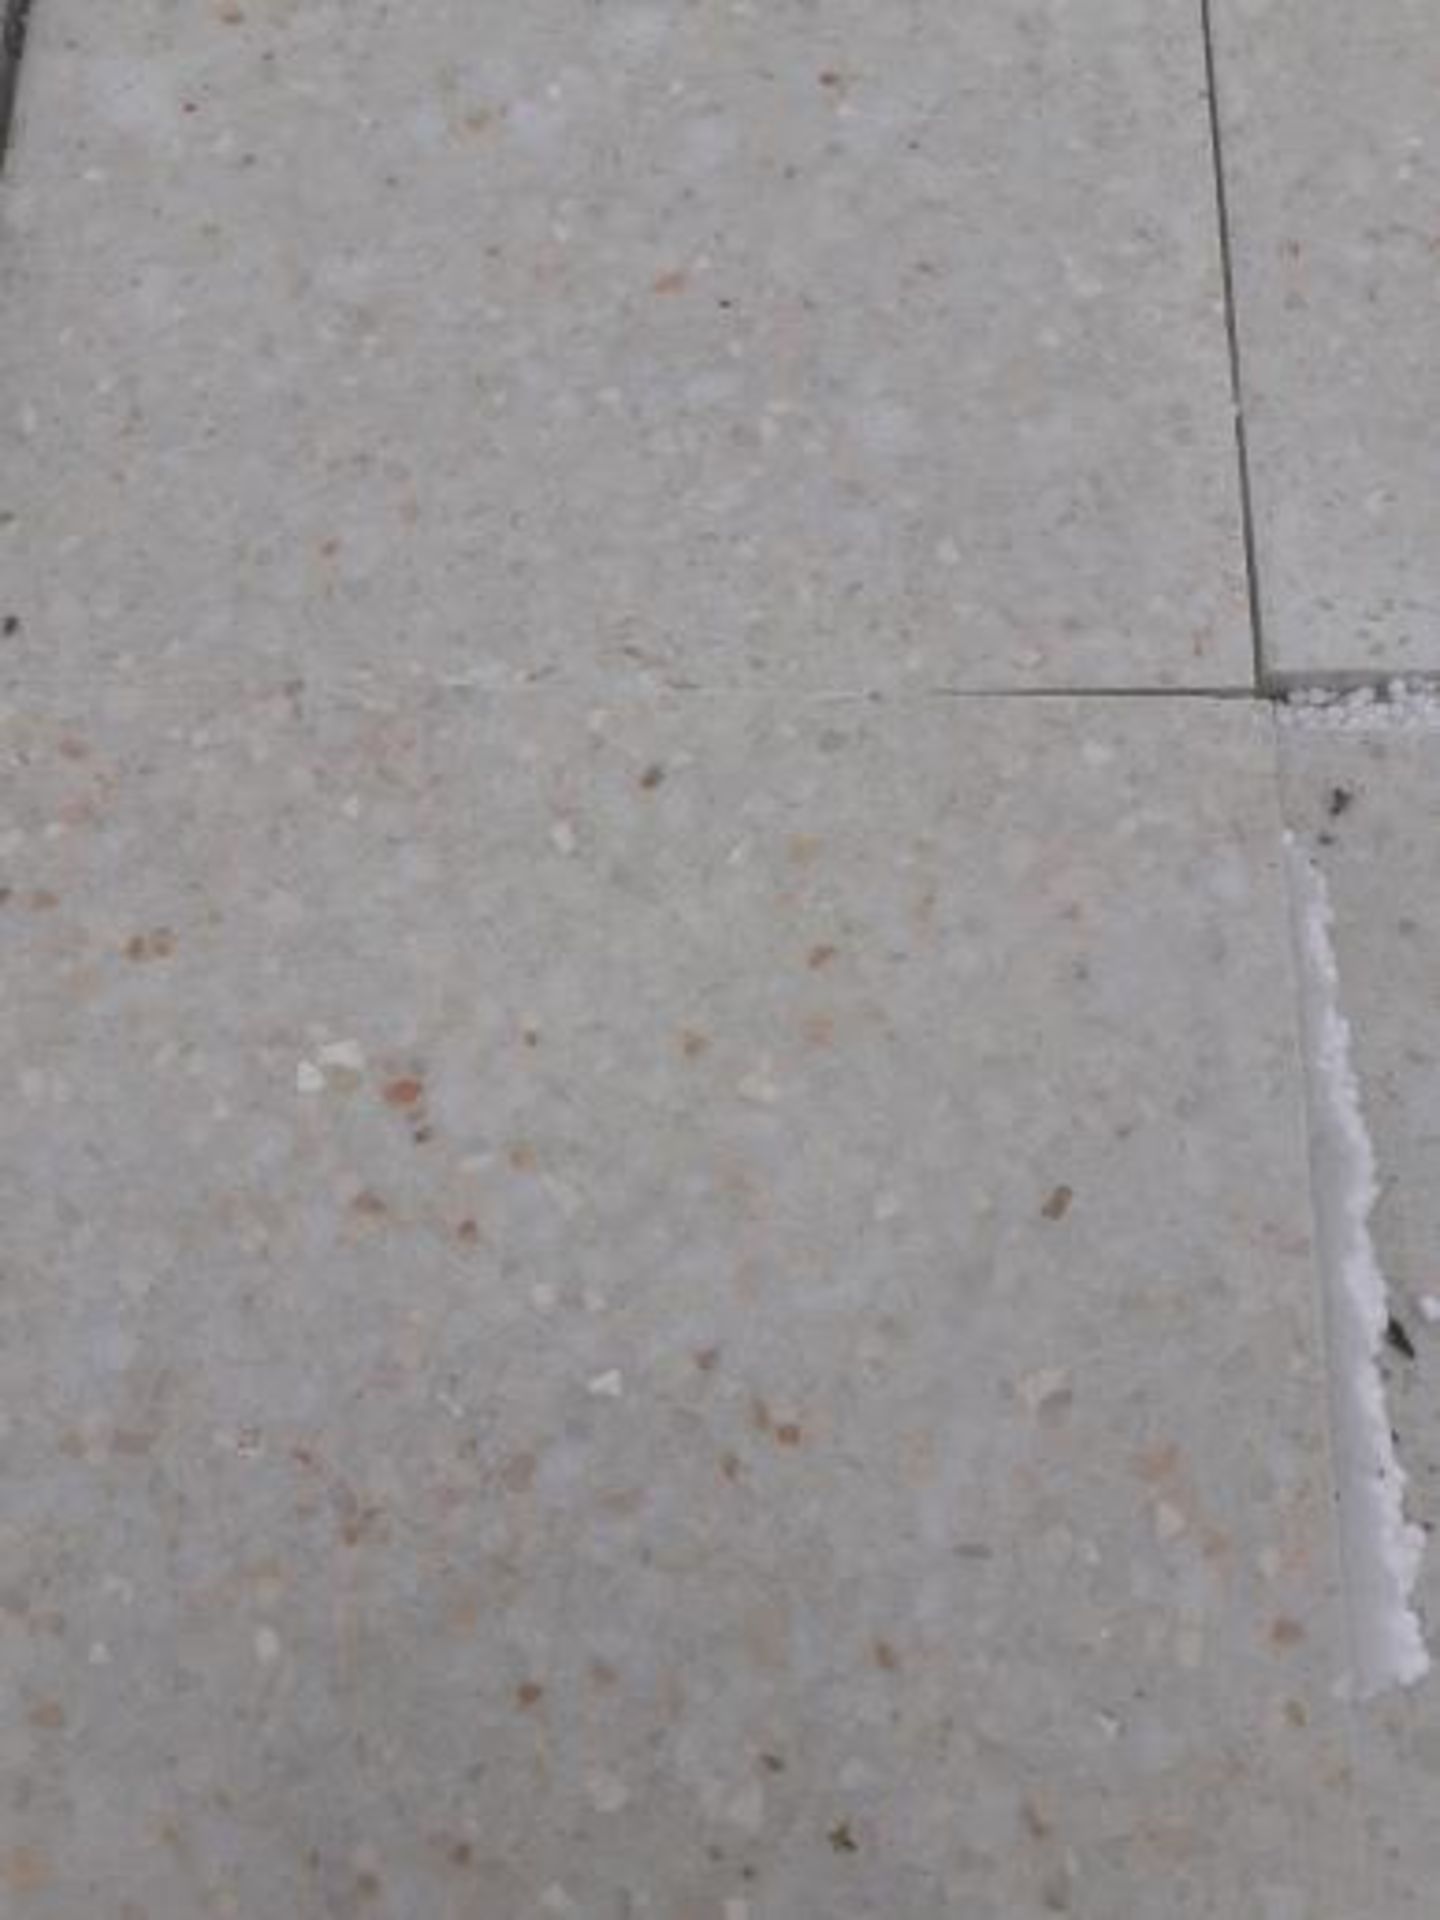 1 PALLET OF BRAND NEW TERRAZZO COMMERCIAL FLOOR TILES (Z30011), COVERS 24 SQUARE YARDS *PLUS VAT* - Image 5 of 15